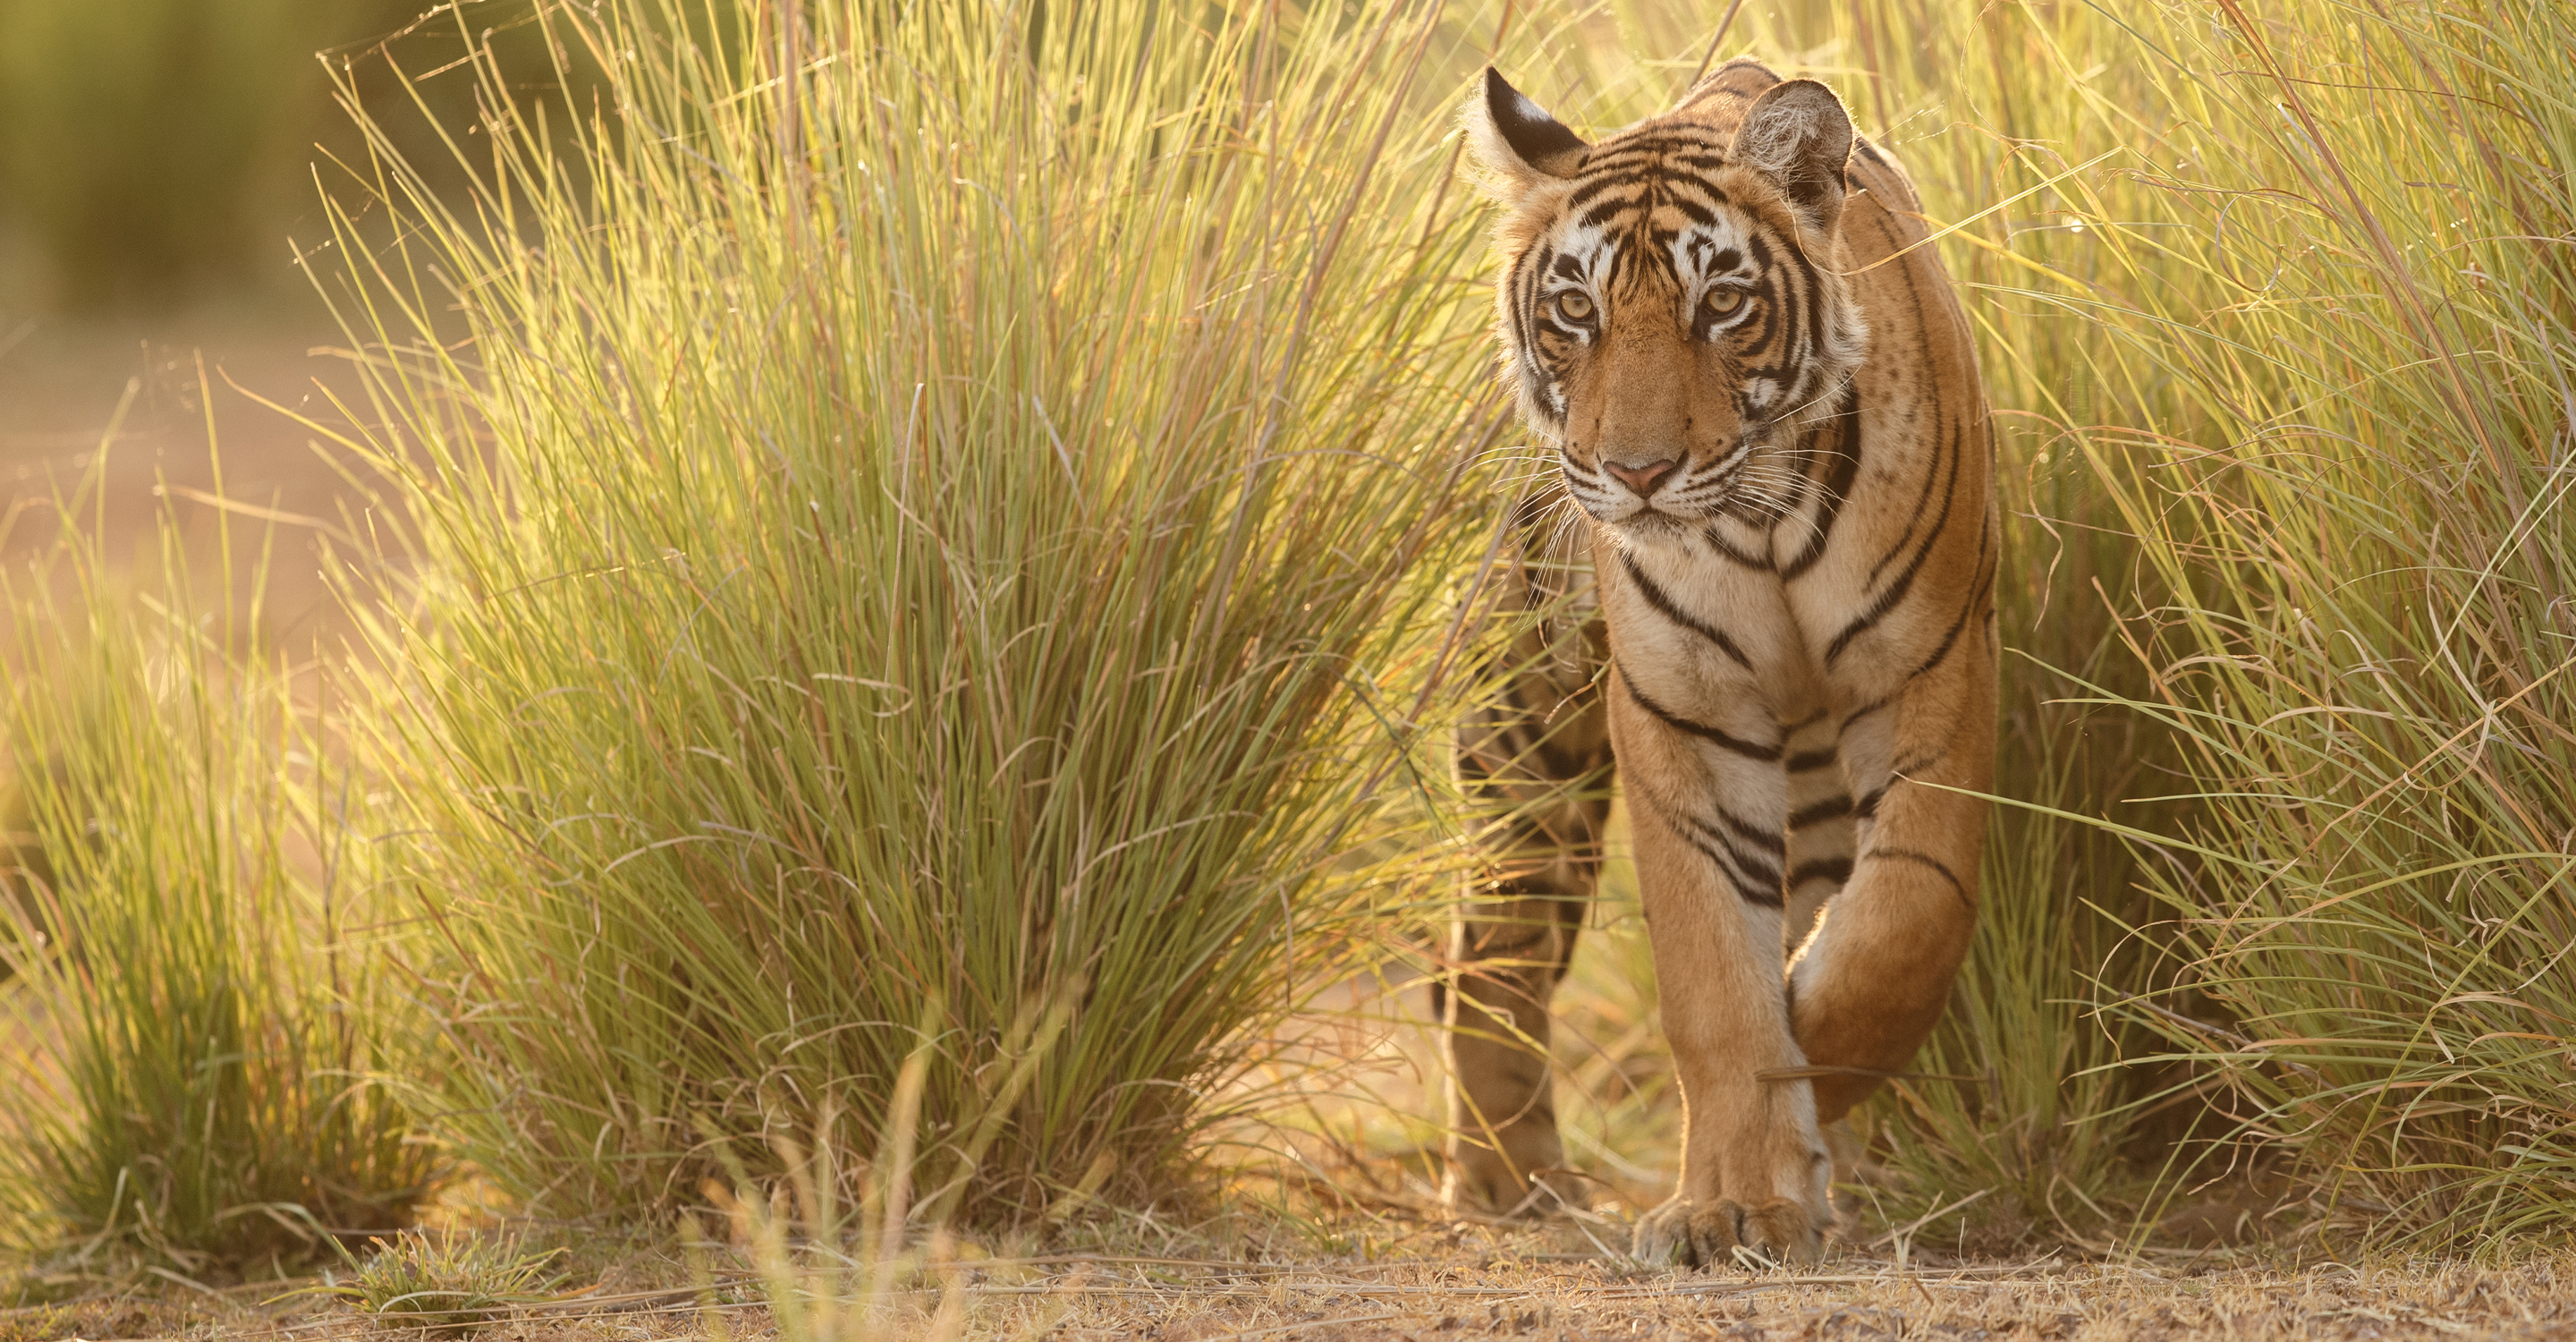 A tiger emerges from the tall grass in Ranthambhore National Park, India